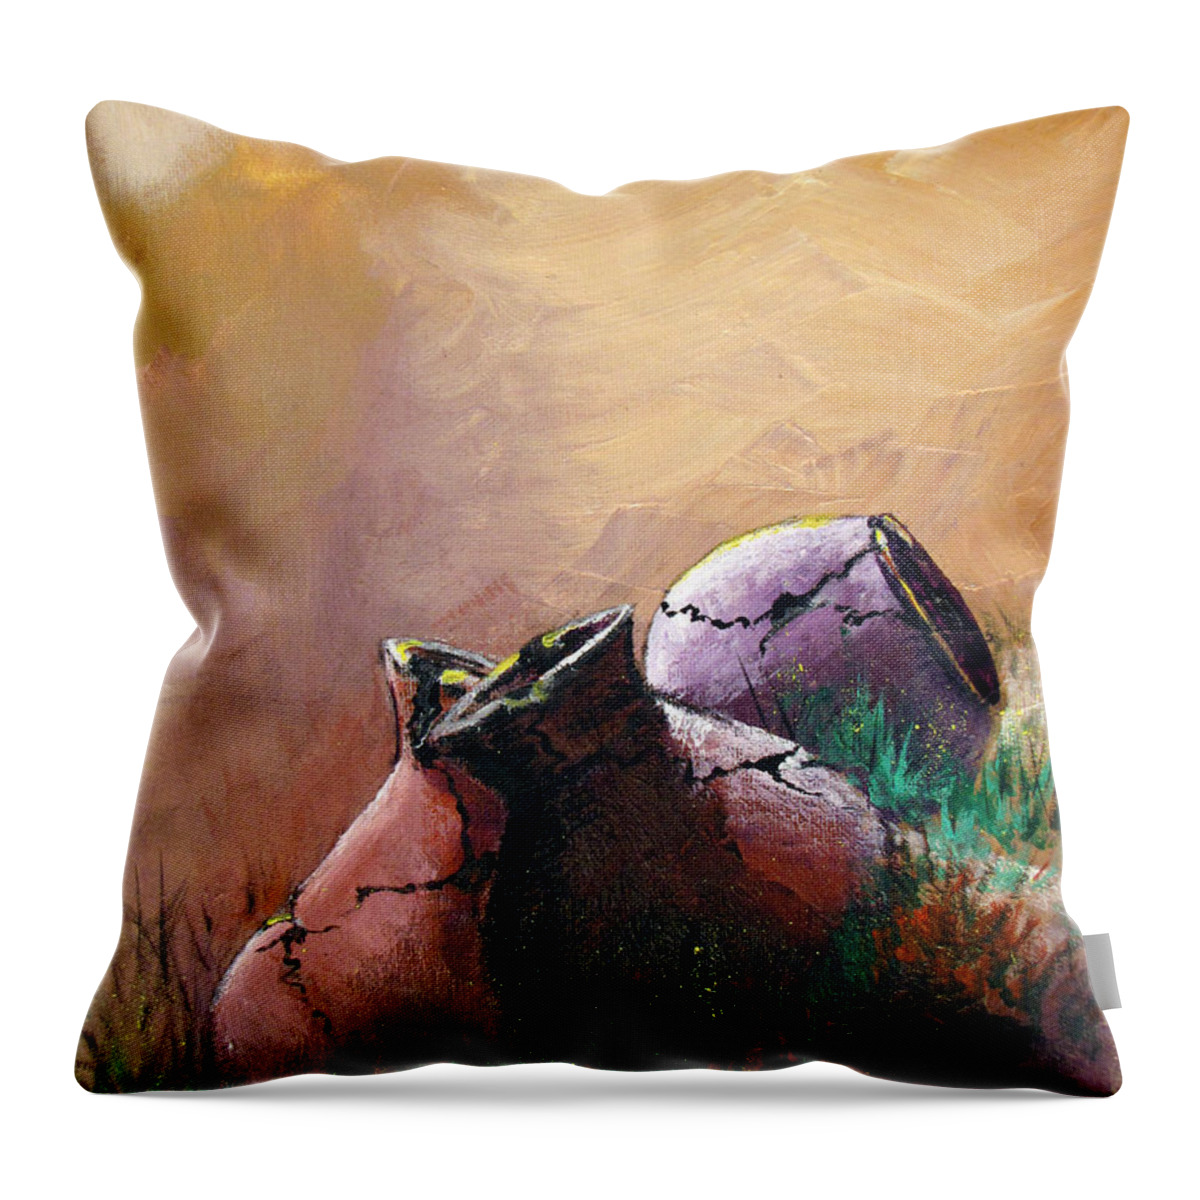 Pots Throw Pillow featuring the painting Old Cracked Pots-SOLD by Gary Smith